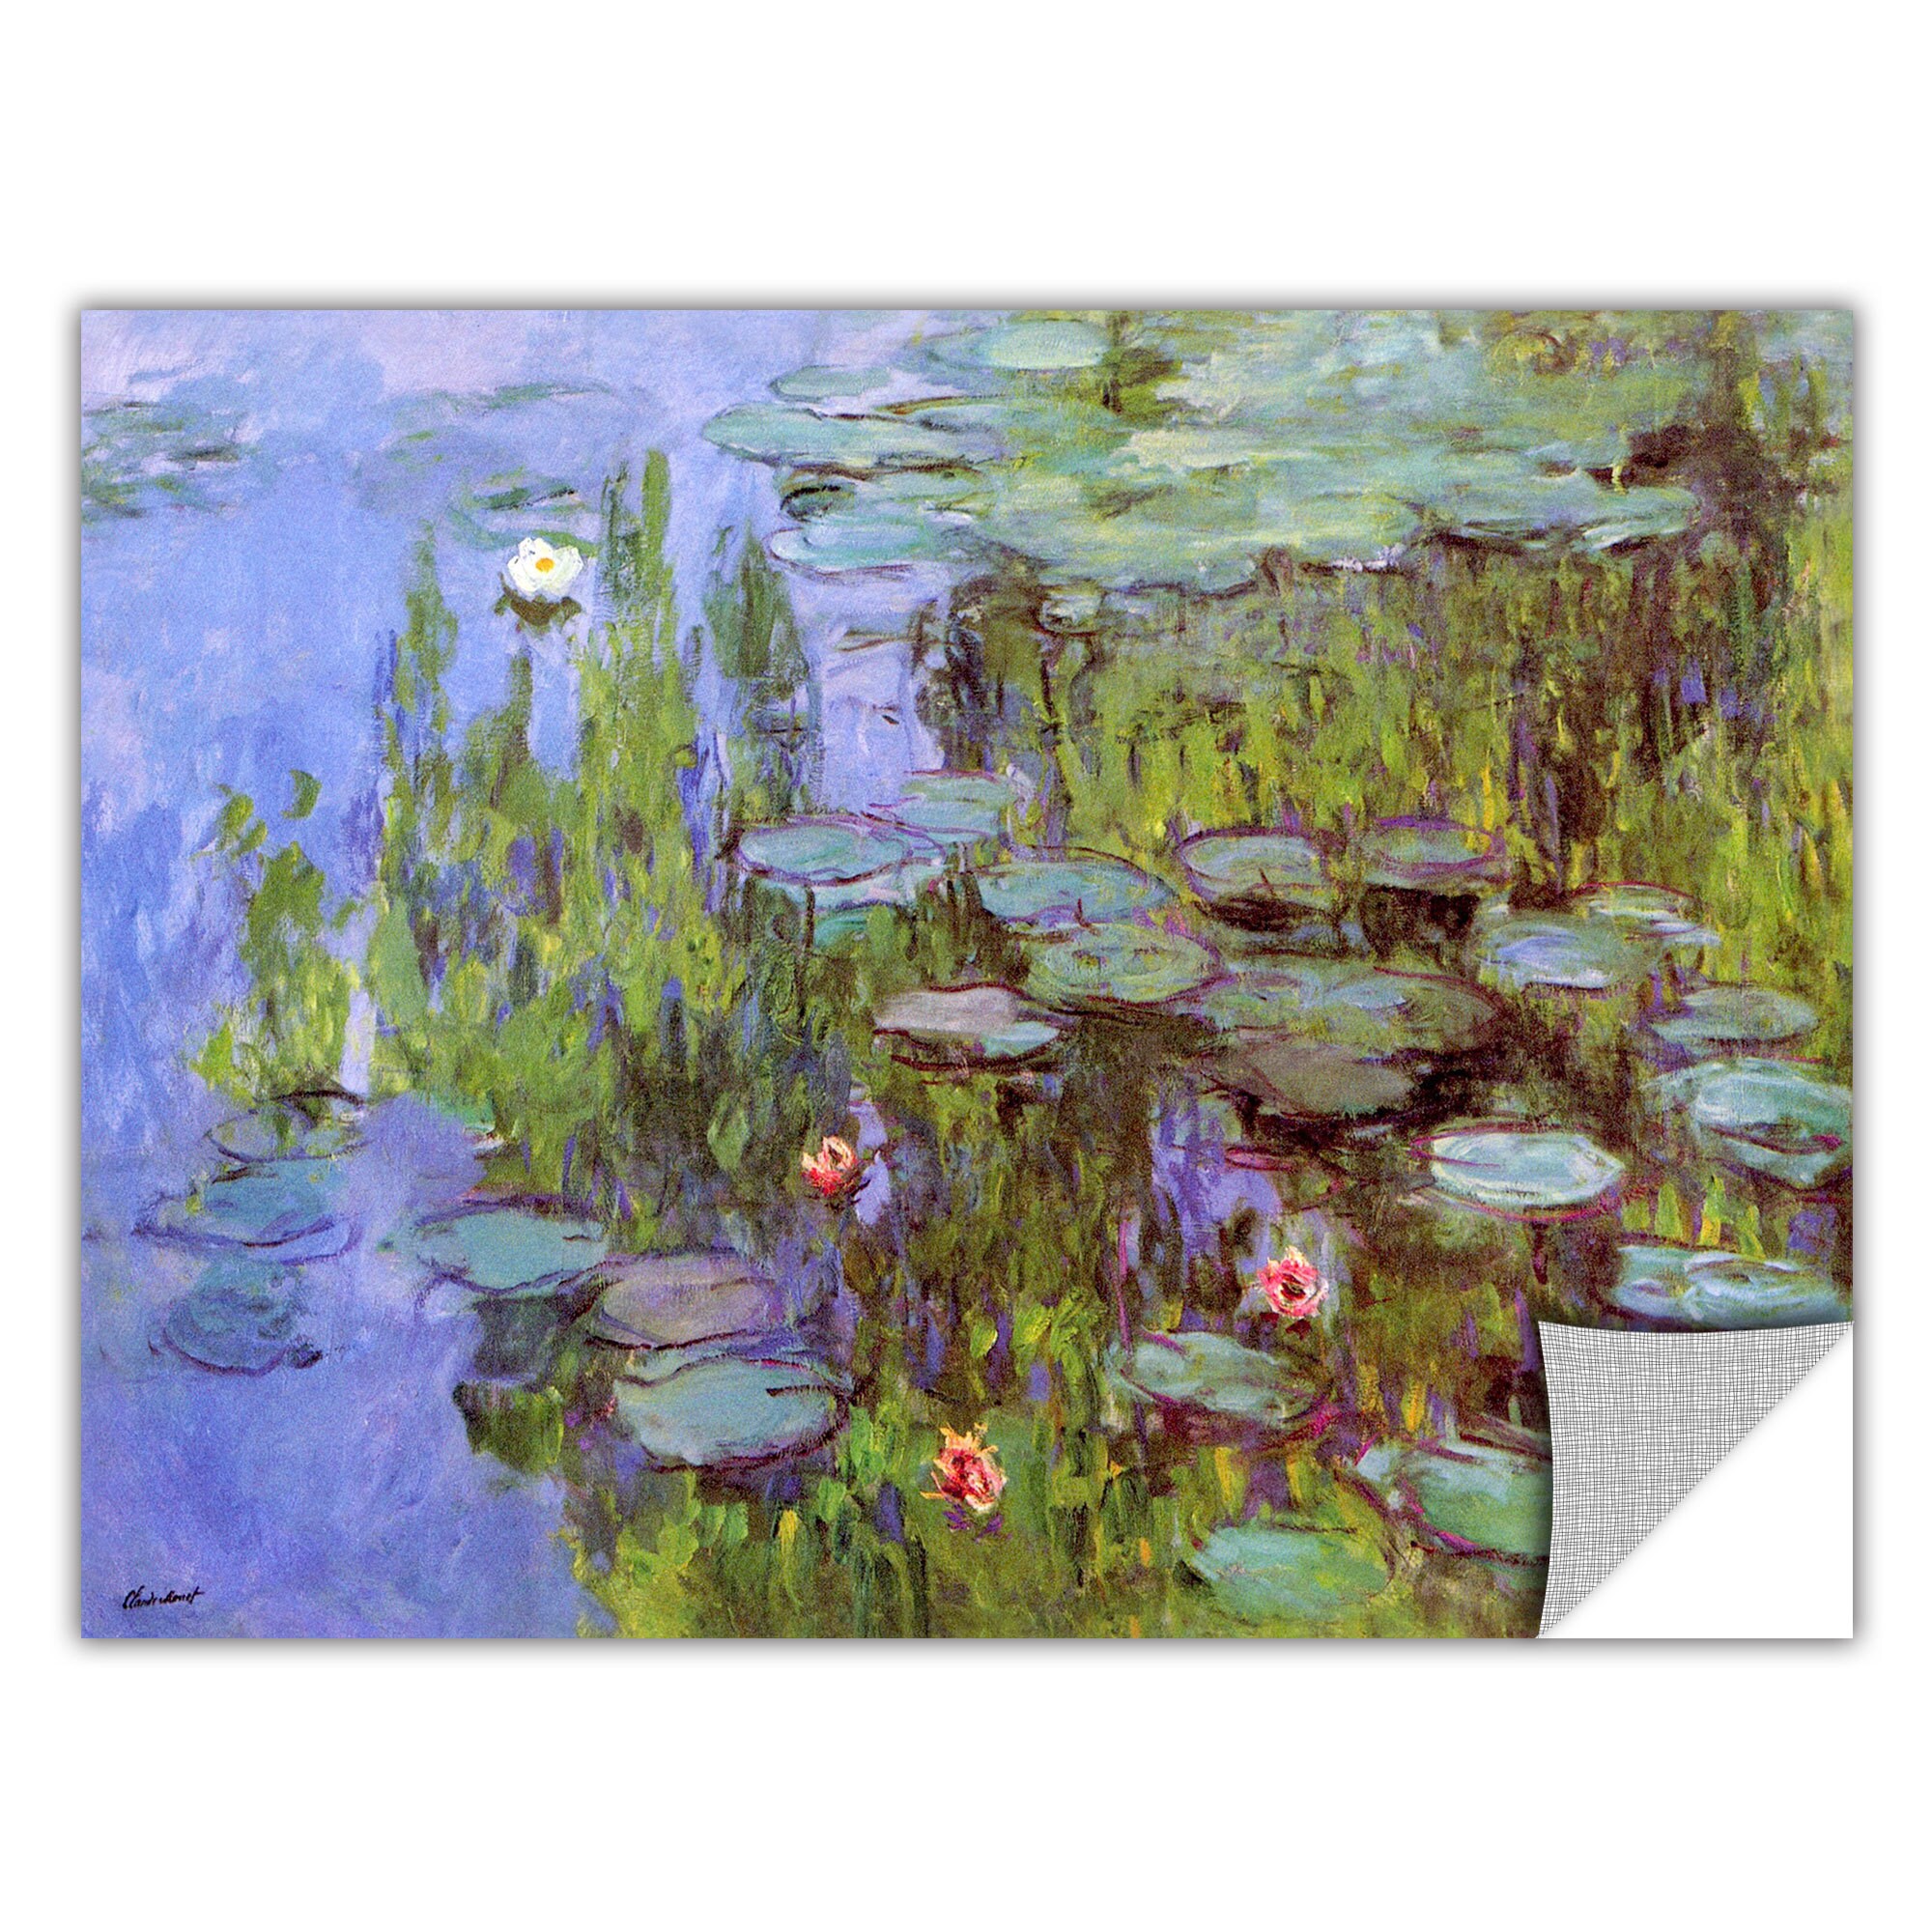 14 by 18-Inch ArtWall Sea Roses Removable Wall Art by Claude Monet 